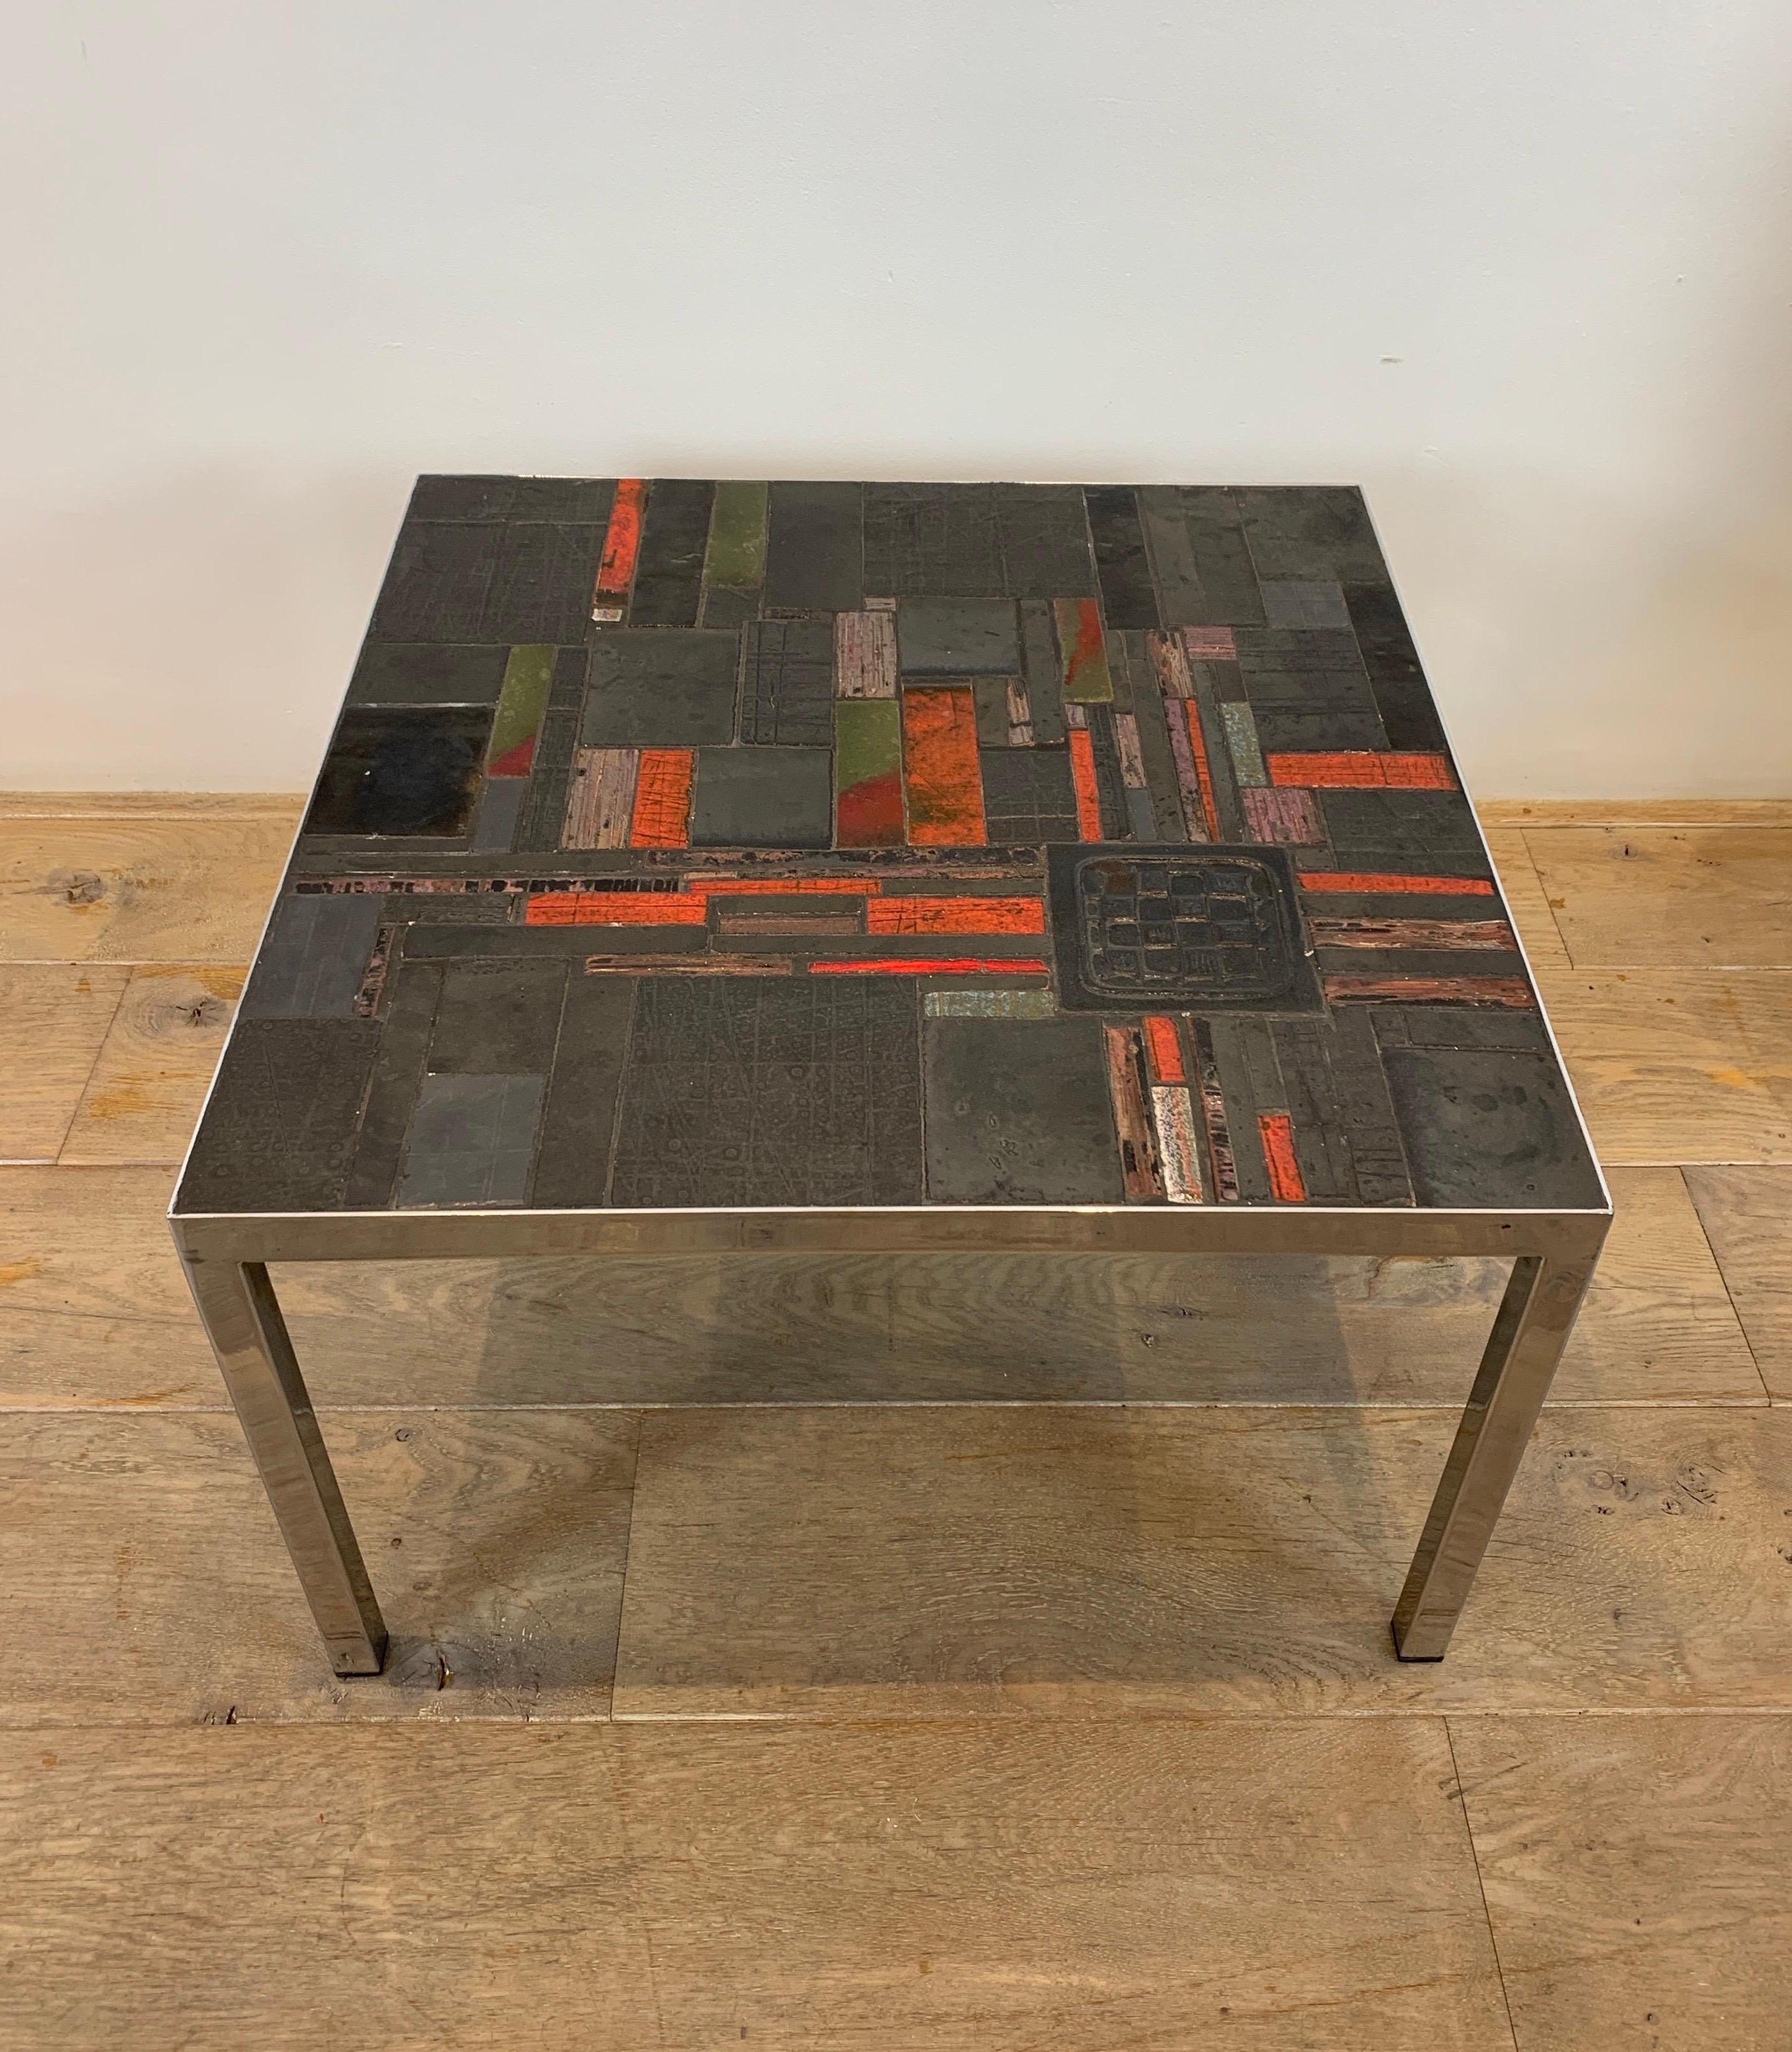 Pia Manu is famous Belgian Ceramist active from the fifties. He designed ceramic table with ceramics from the Belgian workshop Amphora. The design of the table represents an abstract patchwork of ceramic pieces.